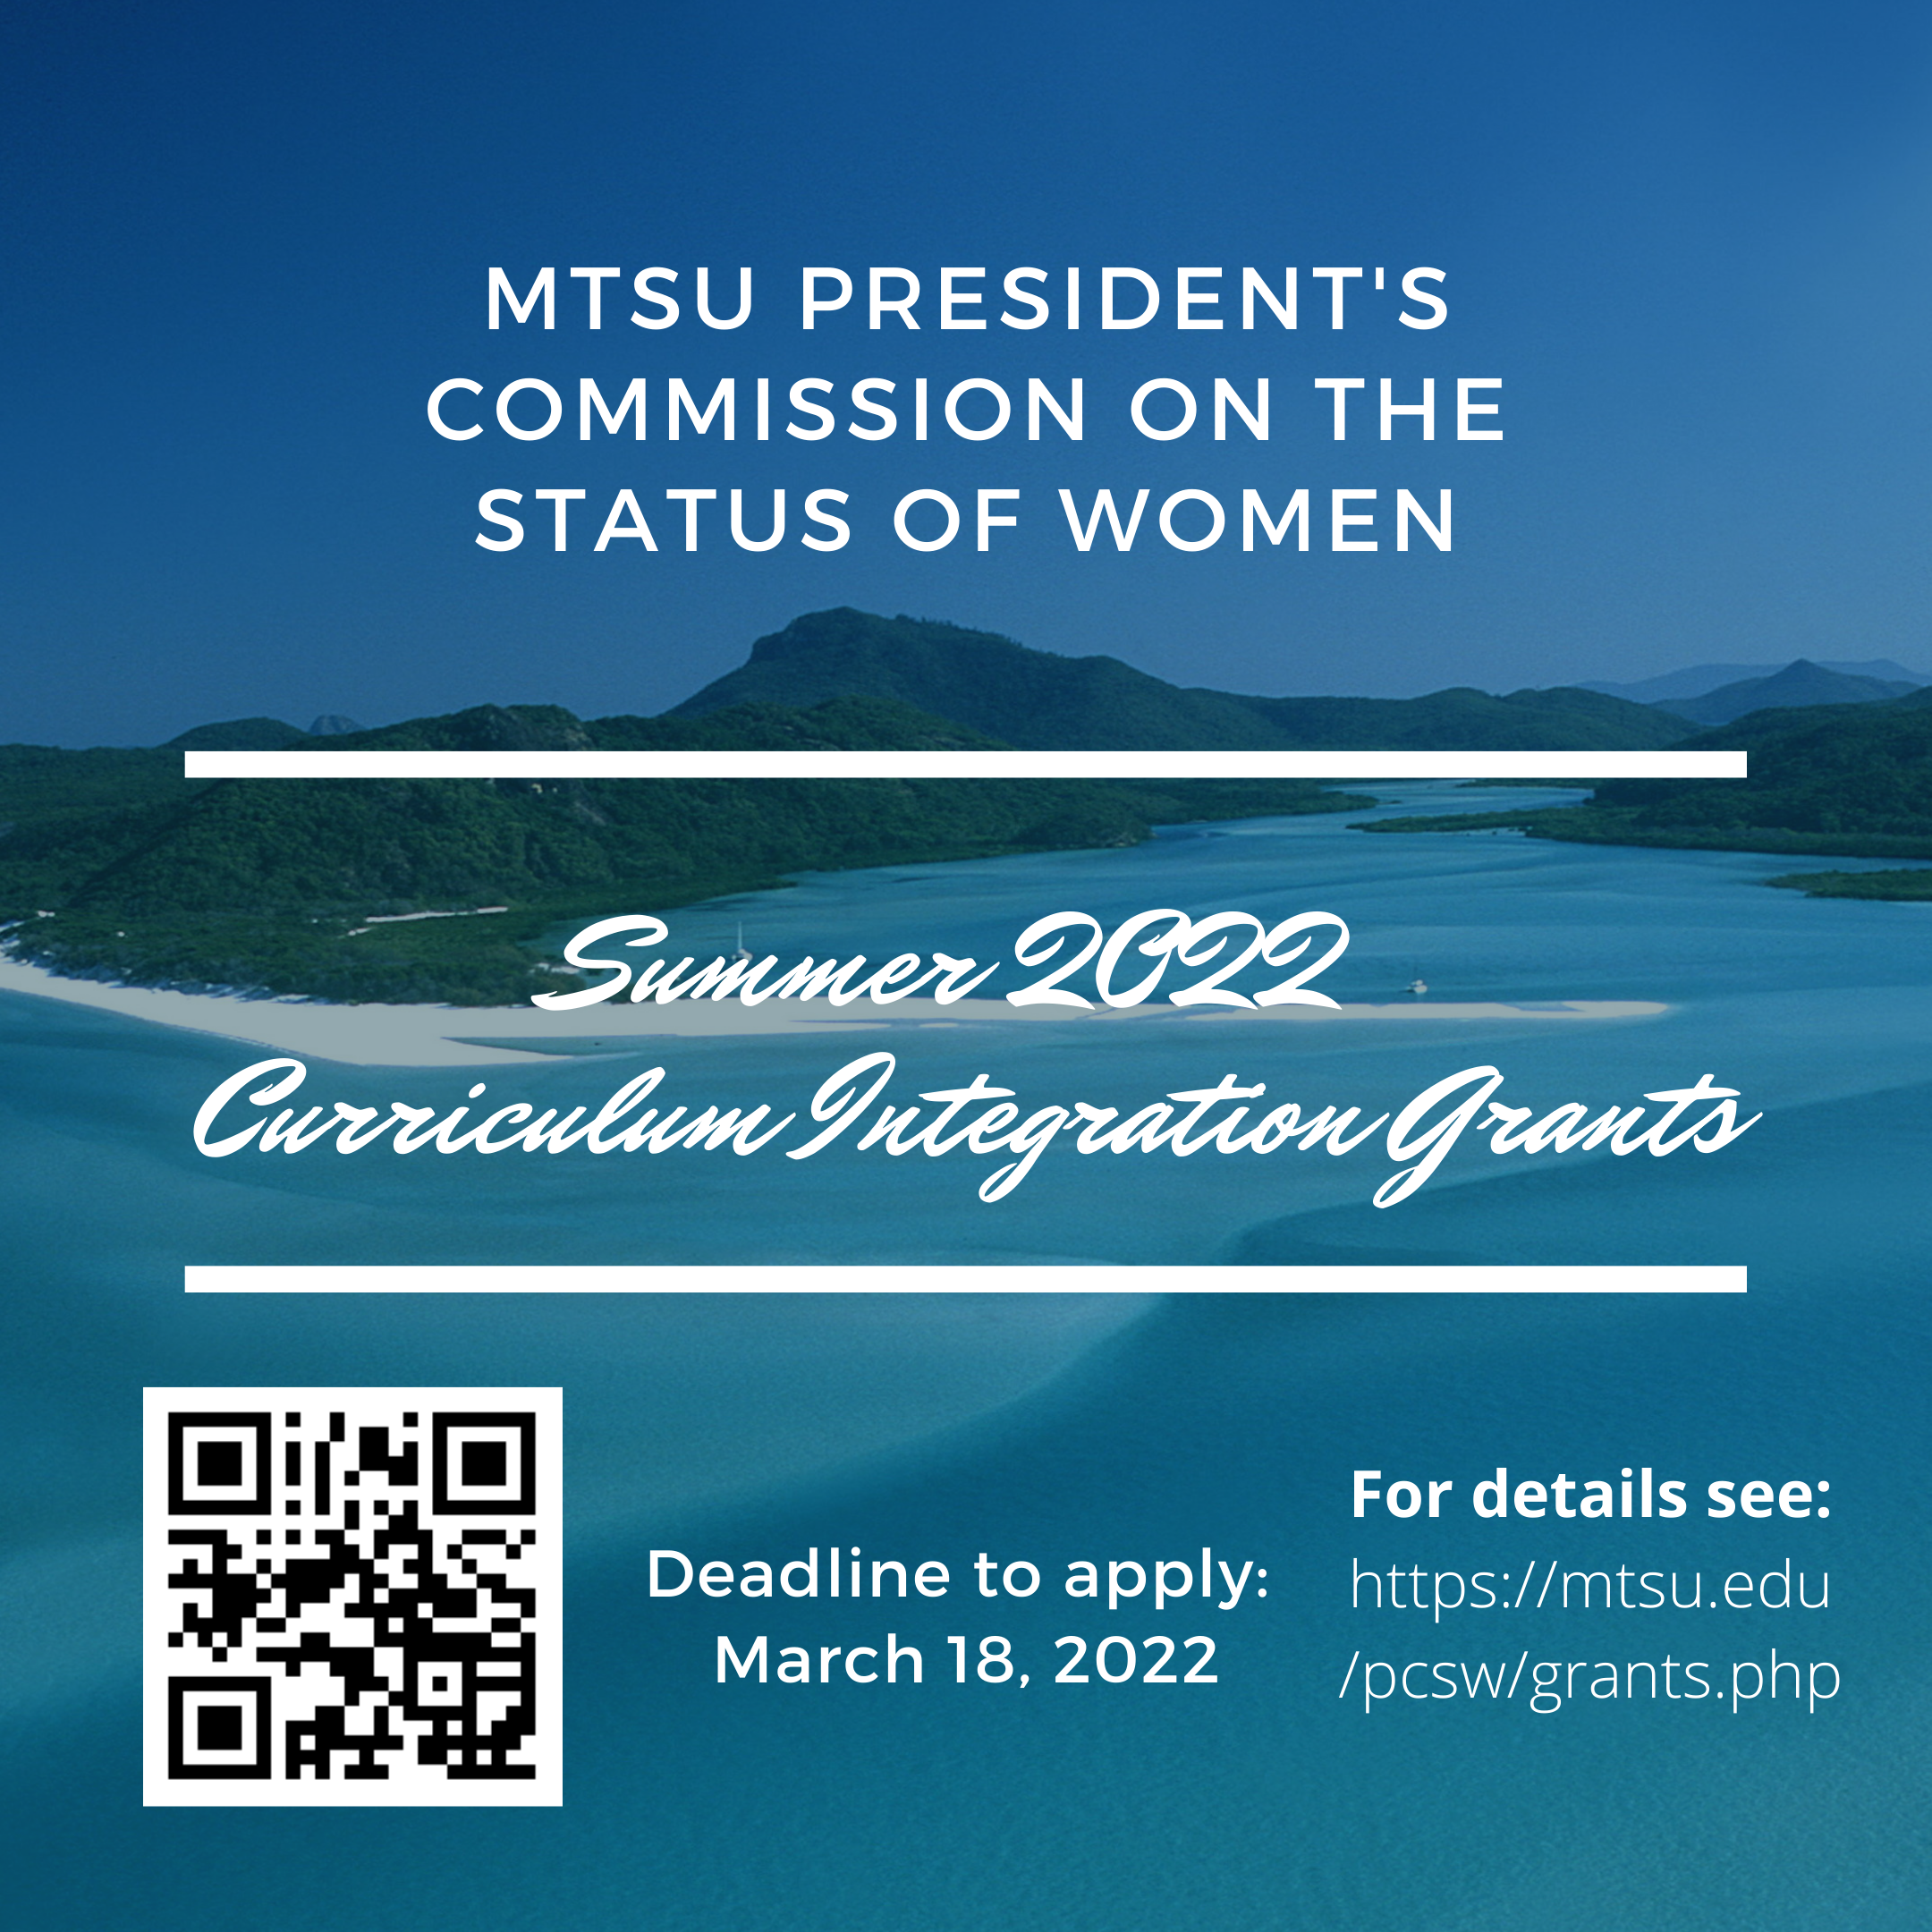 Flier advertising the 2022 Curriculum Integration Grant from MTSU President's Commission on the Status of Women. Deadline to apply is March 18, 2022.